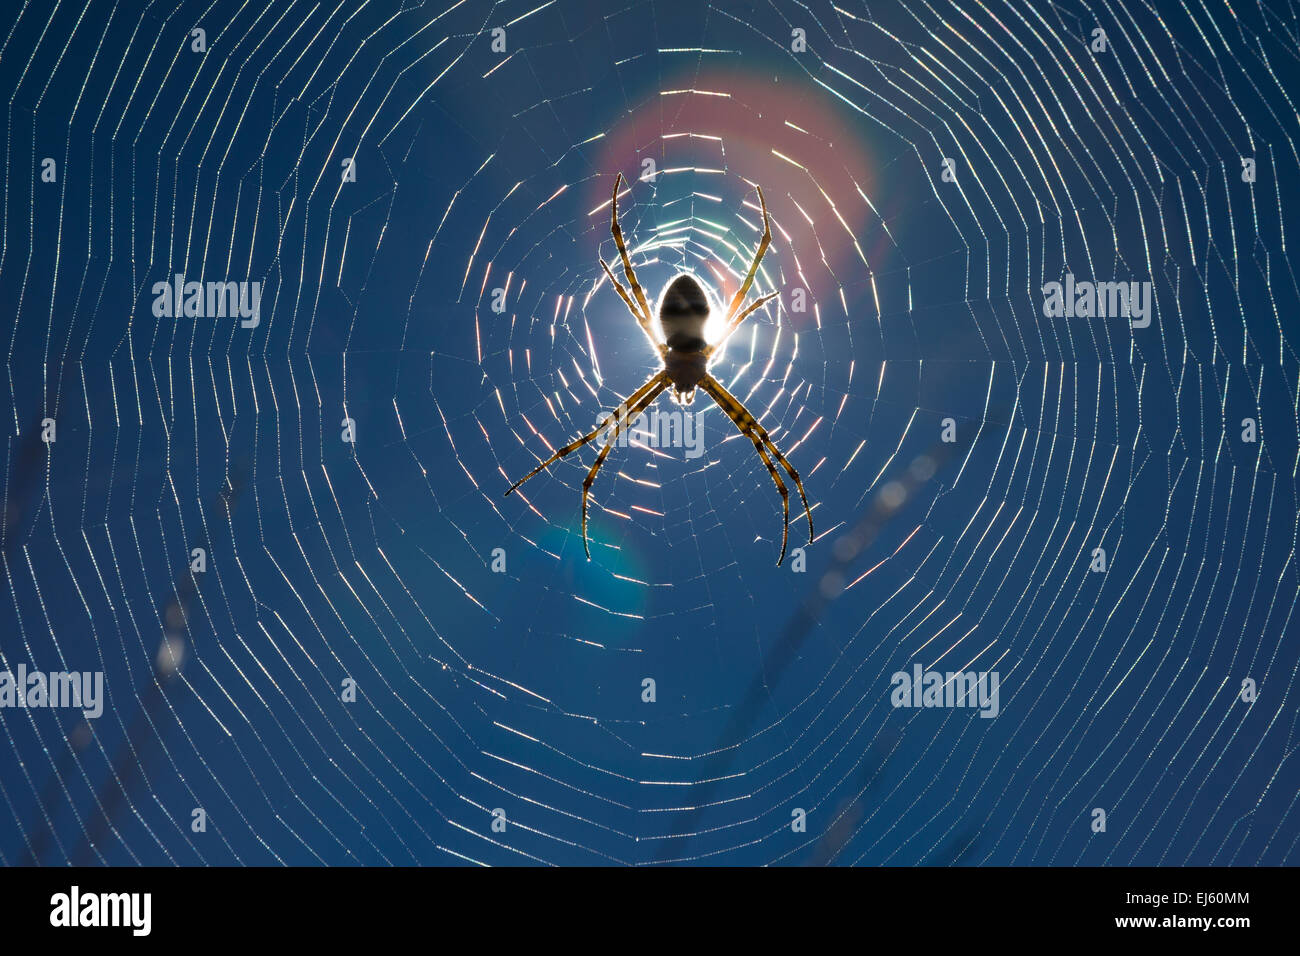 A spider on a web in the morning sun Stock Photo